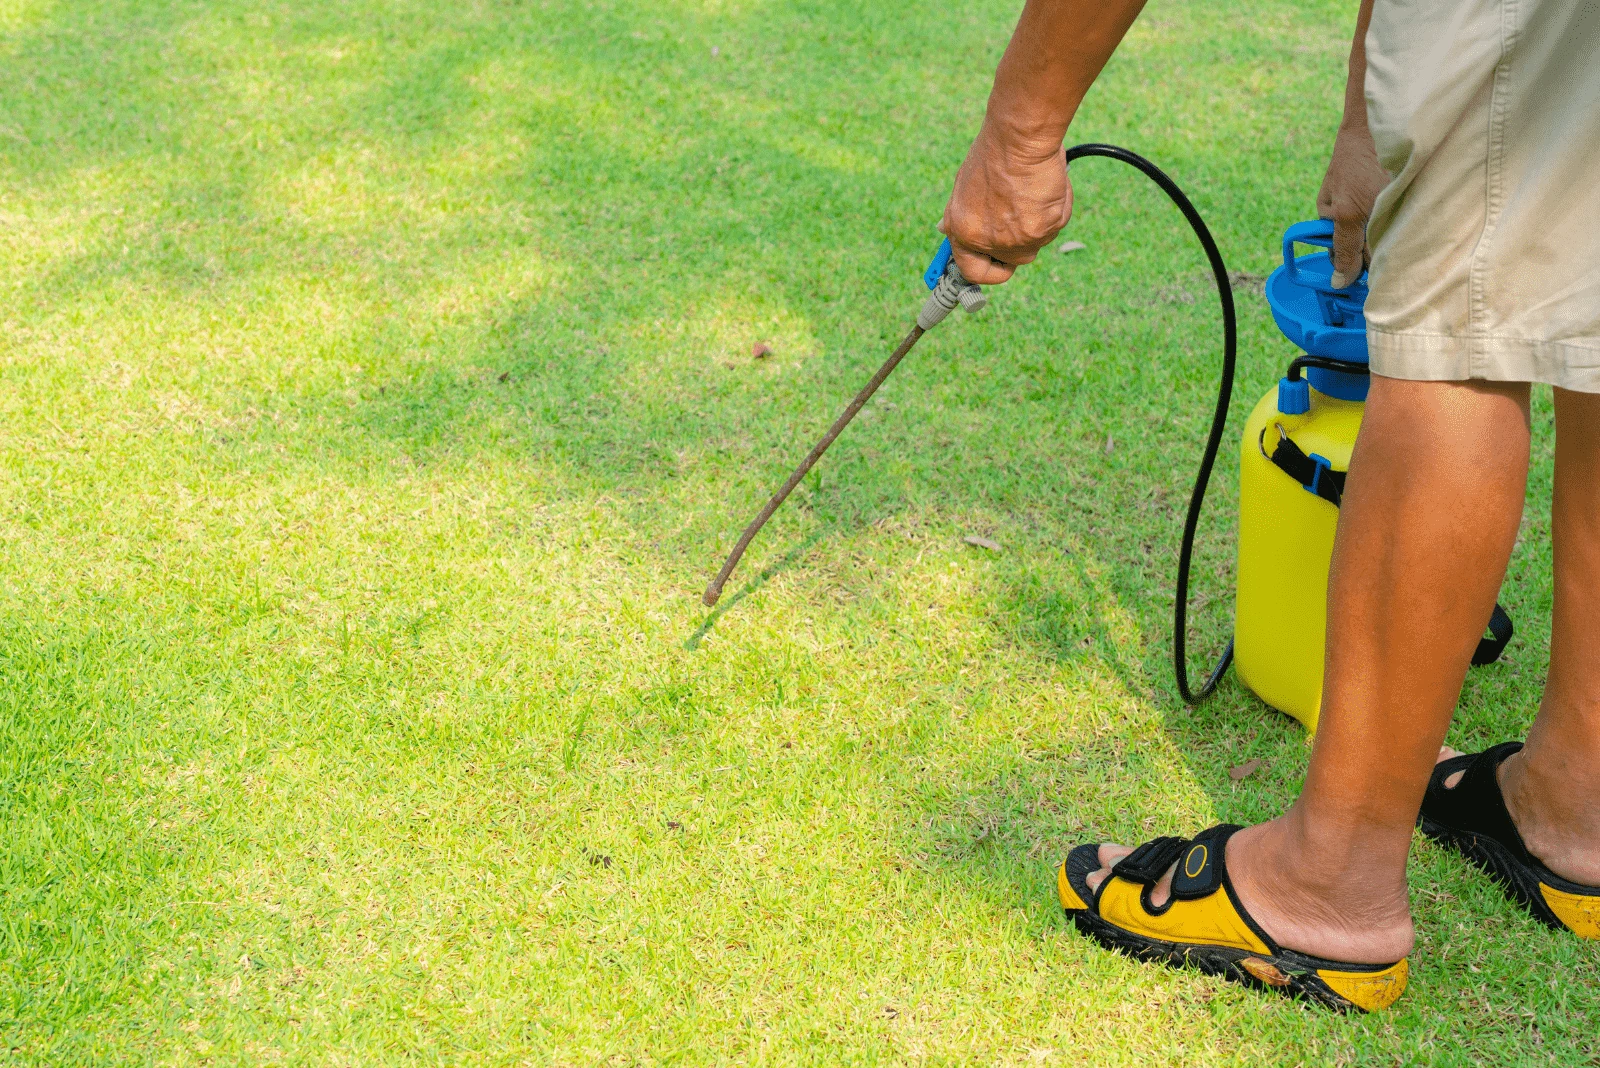 a person sprays weeds in the grass with herbicide